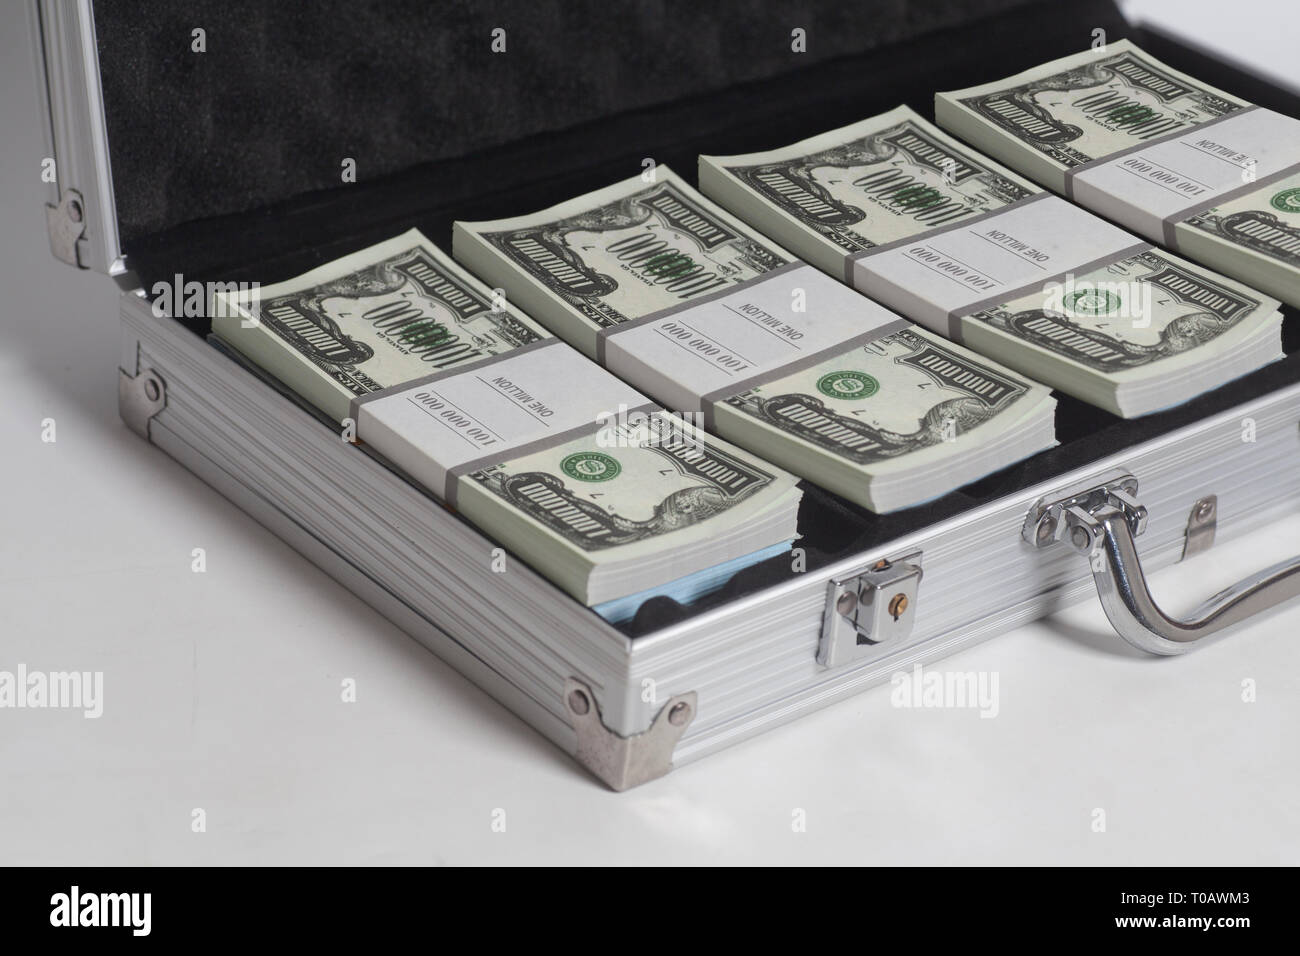 What Does a Bag Designed to Carry $1 Million in Cash Look Like